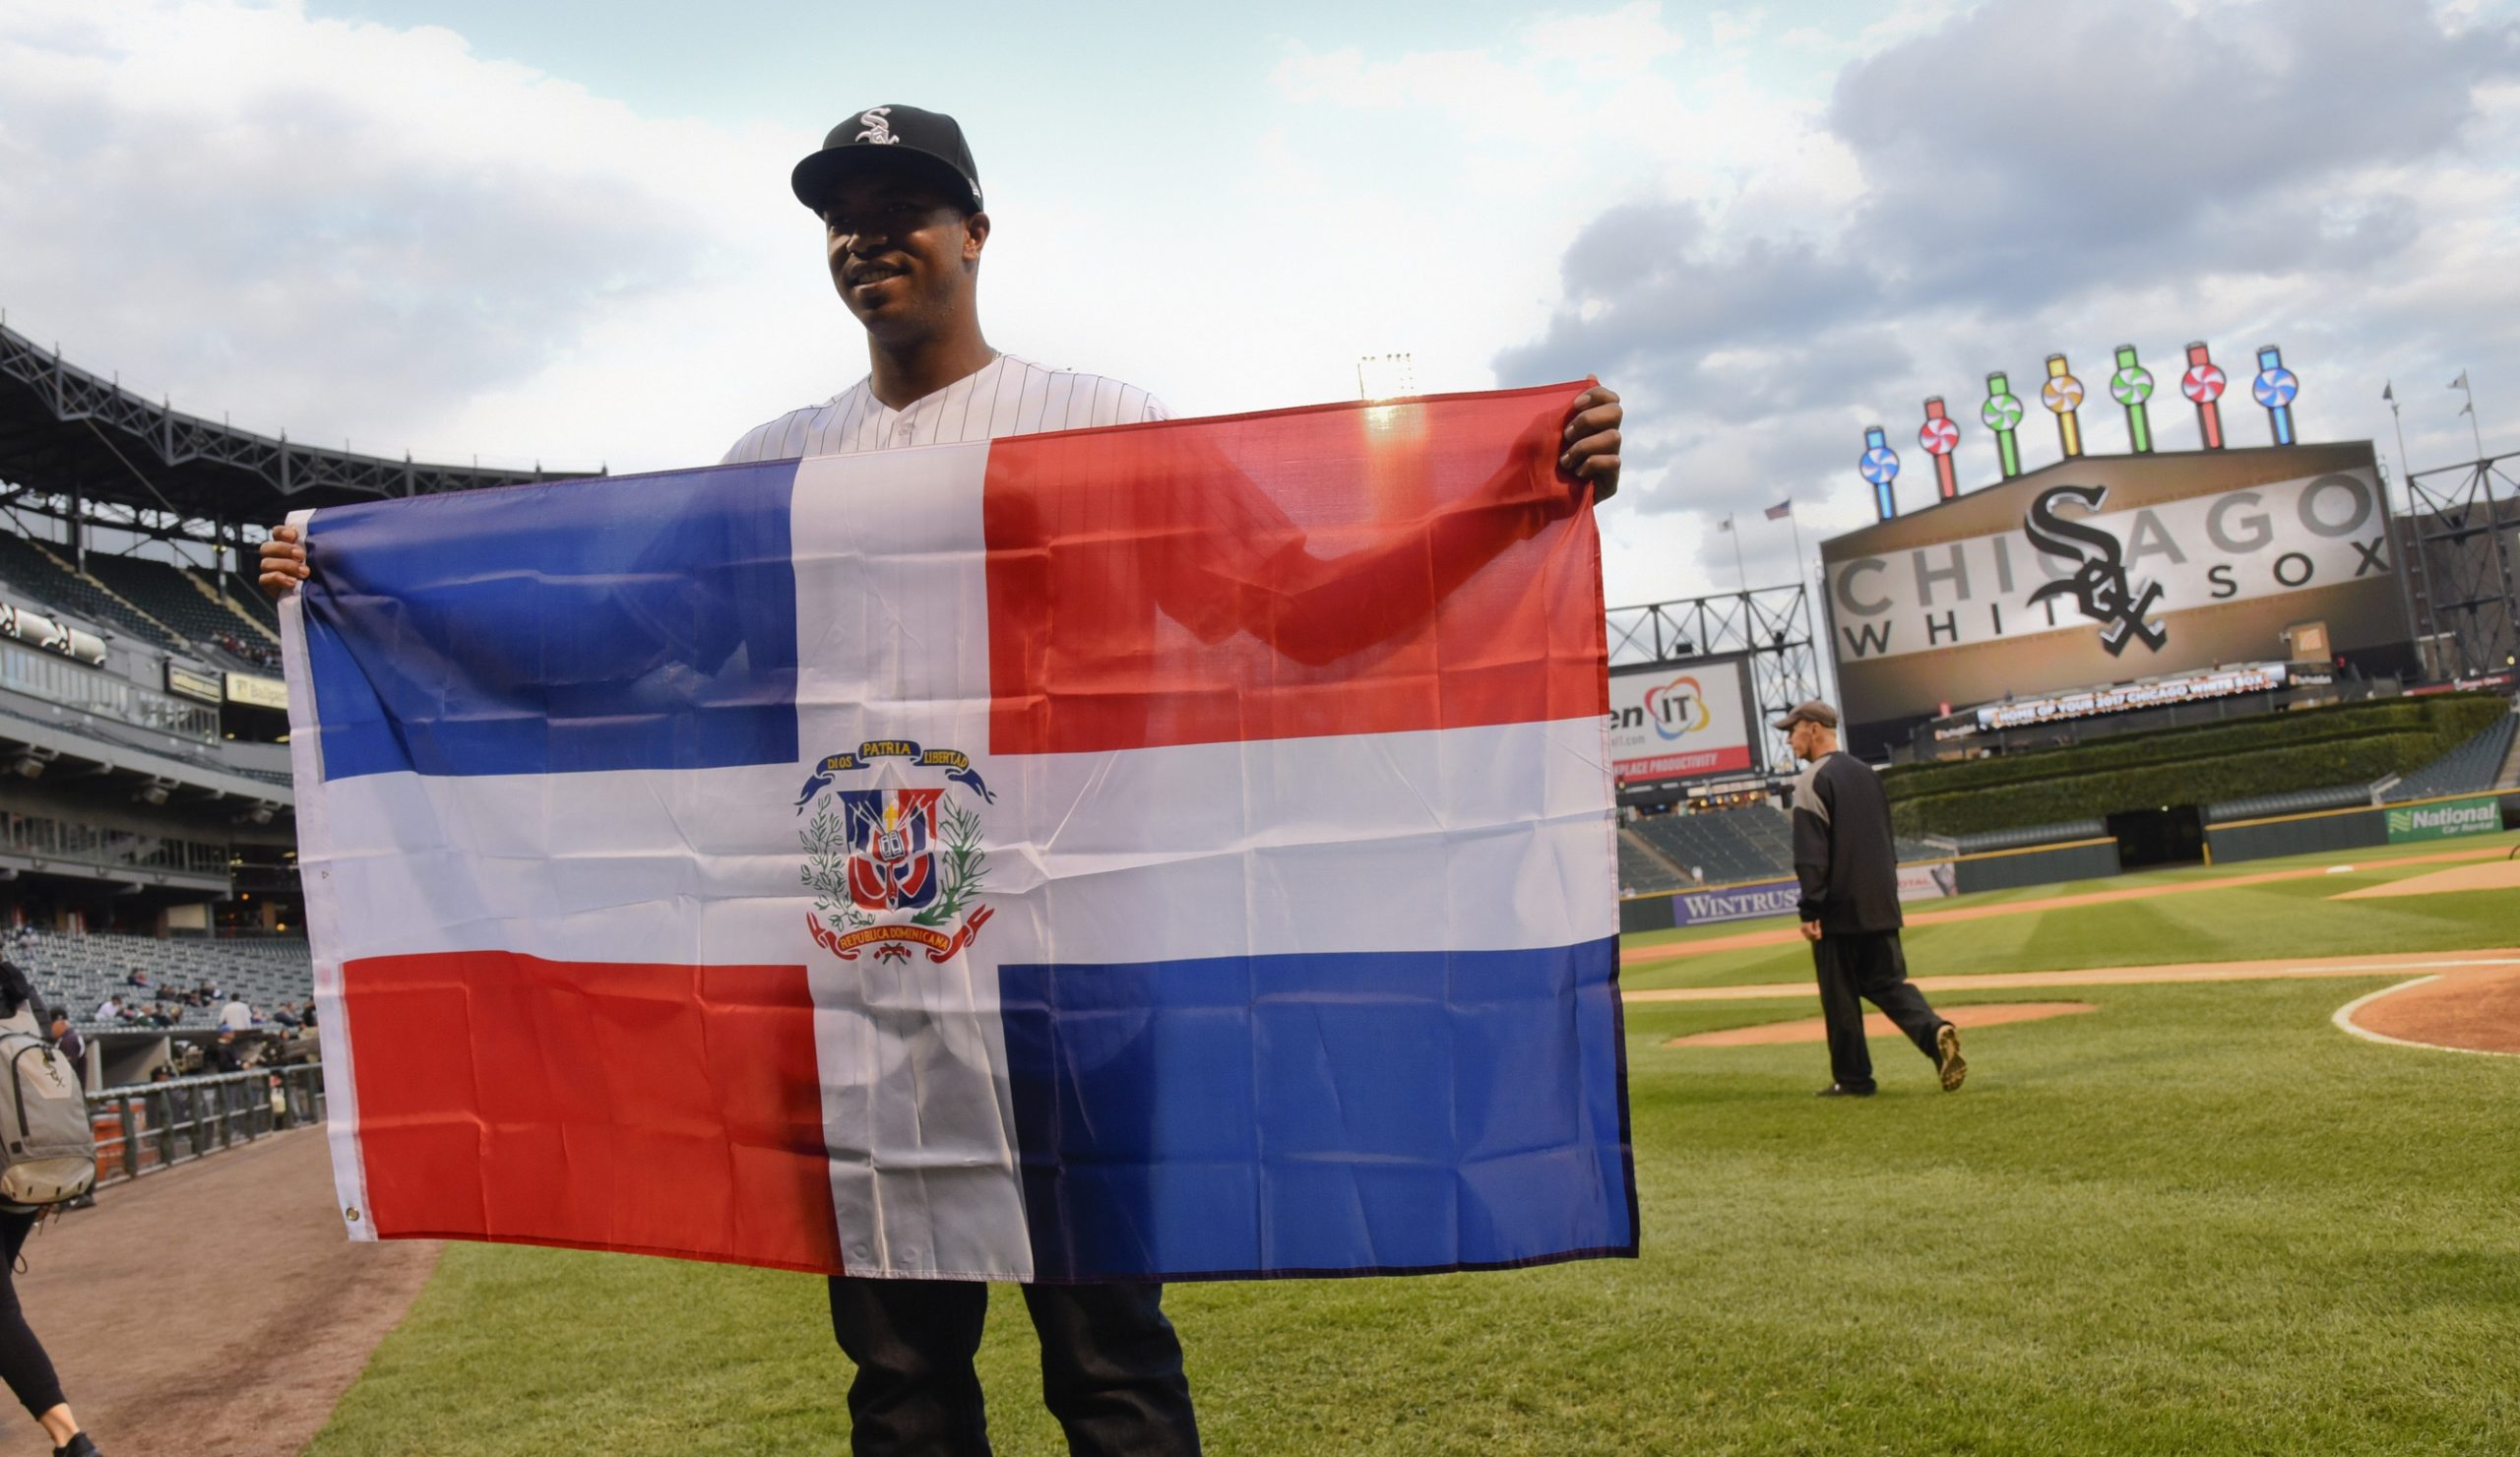 Dominican Baseball for Dominicans: A History of MLB, Imperialism, and the  Dominican Republic (Part 1) - Baseball ProspectusBaseball Prospectus